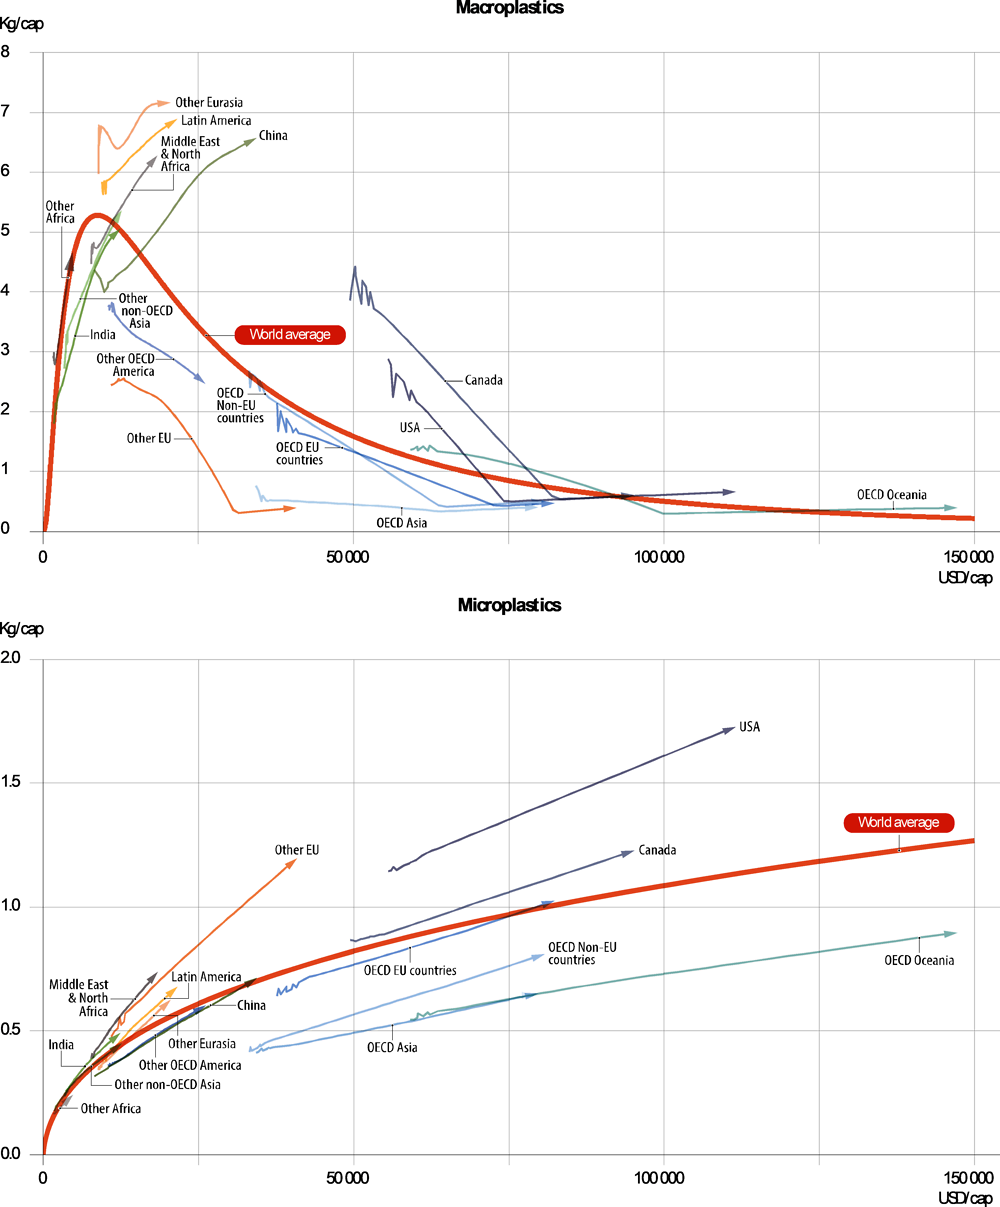 Figure 1.6. Macroplastic and microplastic leakage show different trajectories when income per capita increases